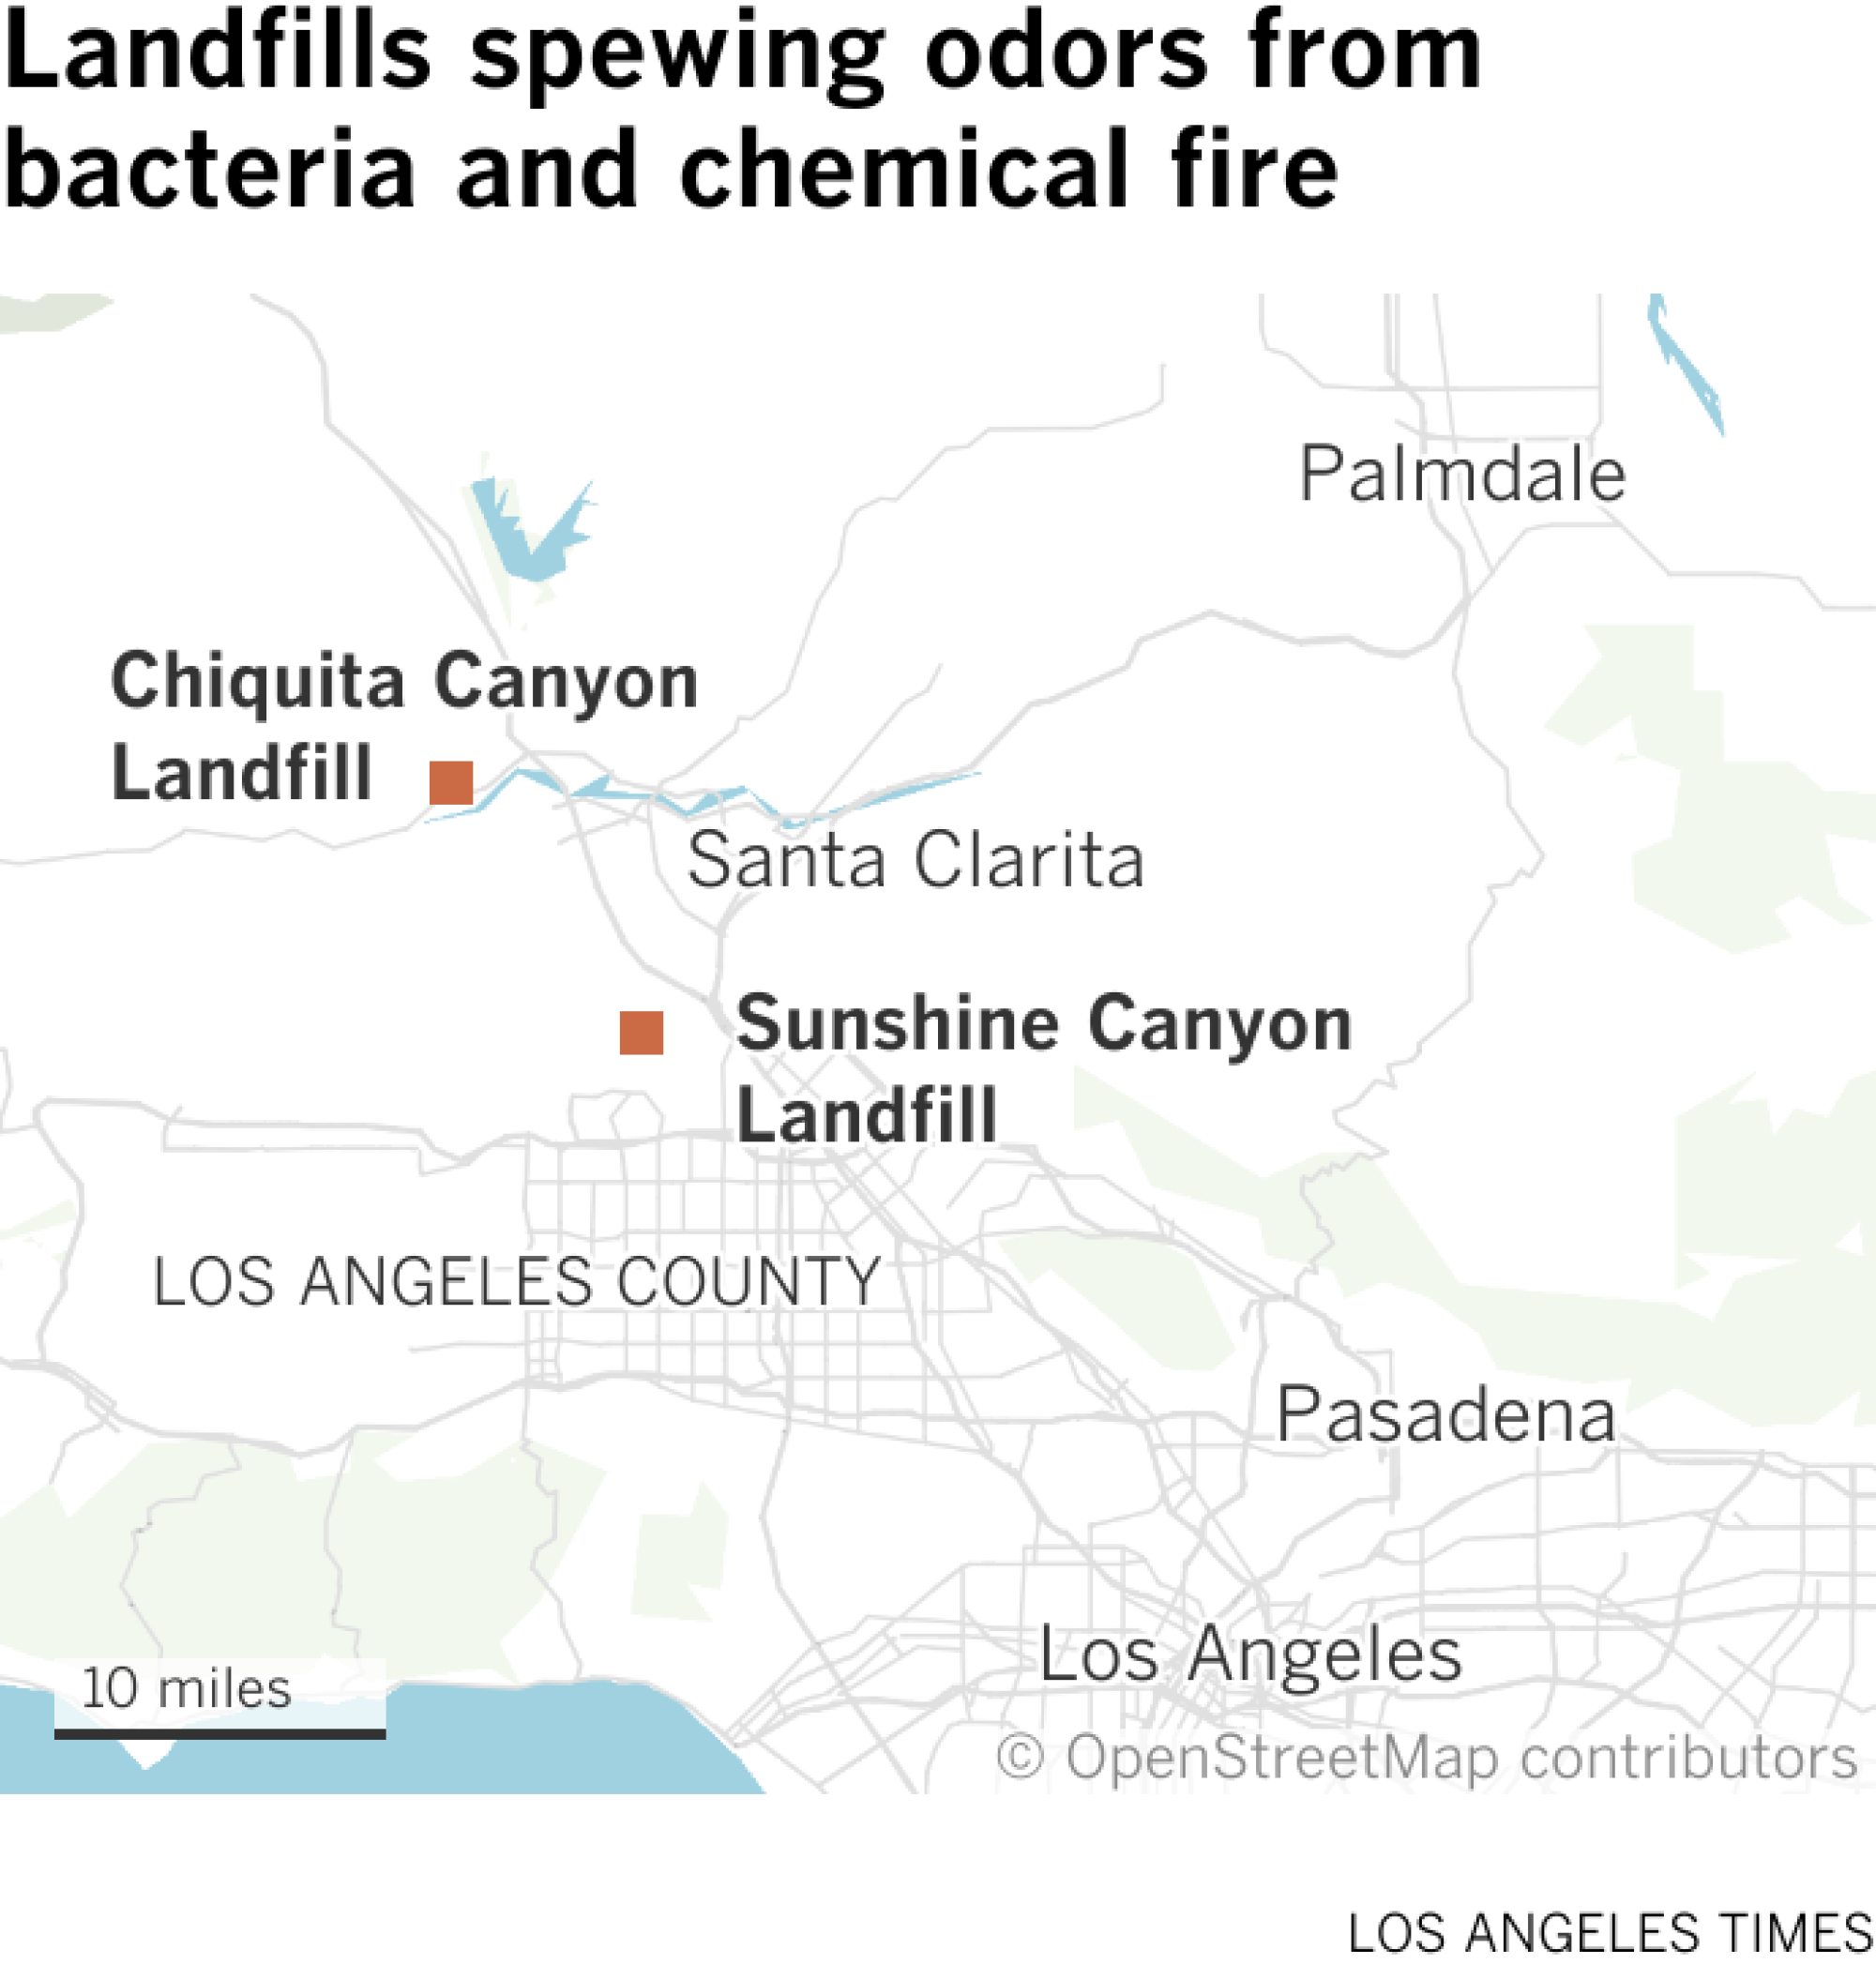 Map shows the location of Chiquita Canyon Landfill near Castaic and Sunshine Canyon Landfill in Sylmar